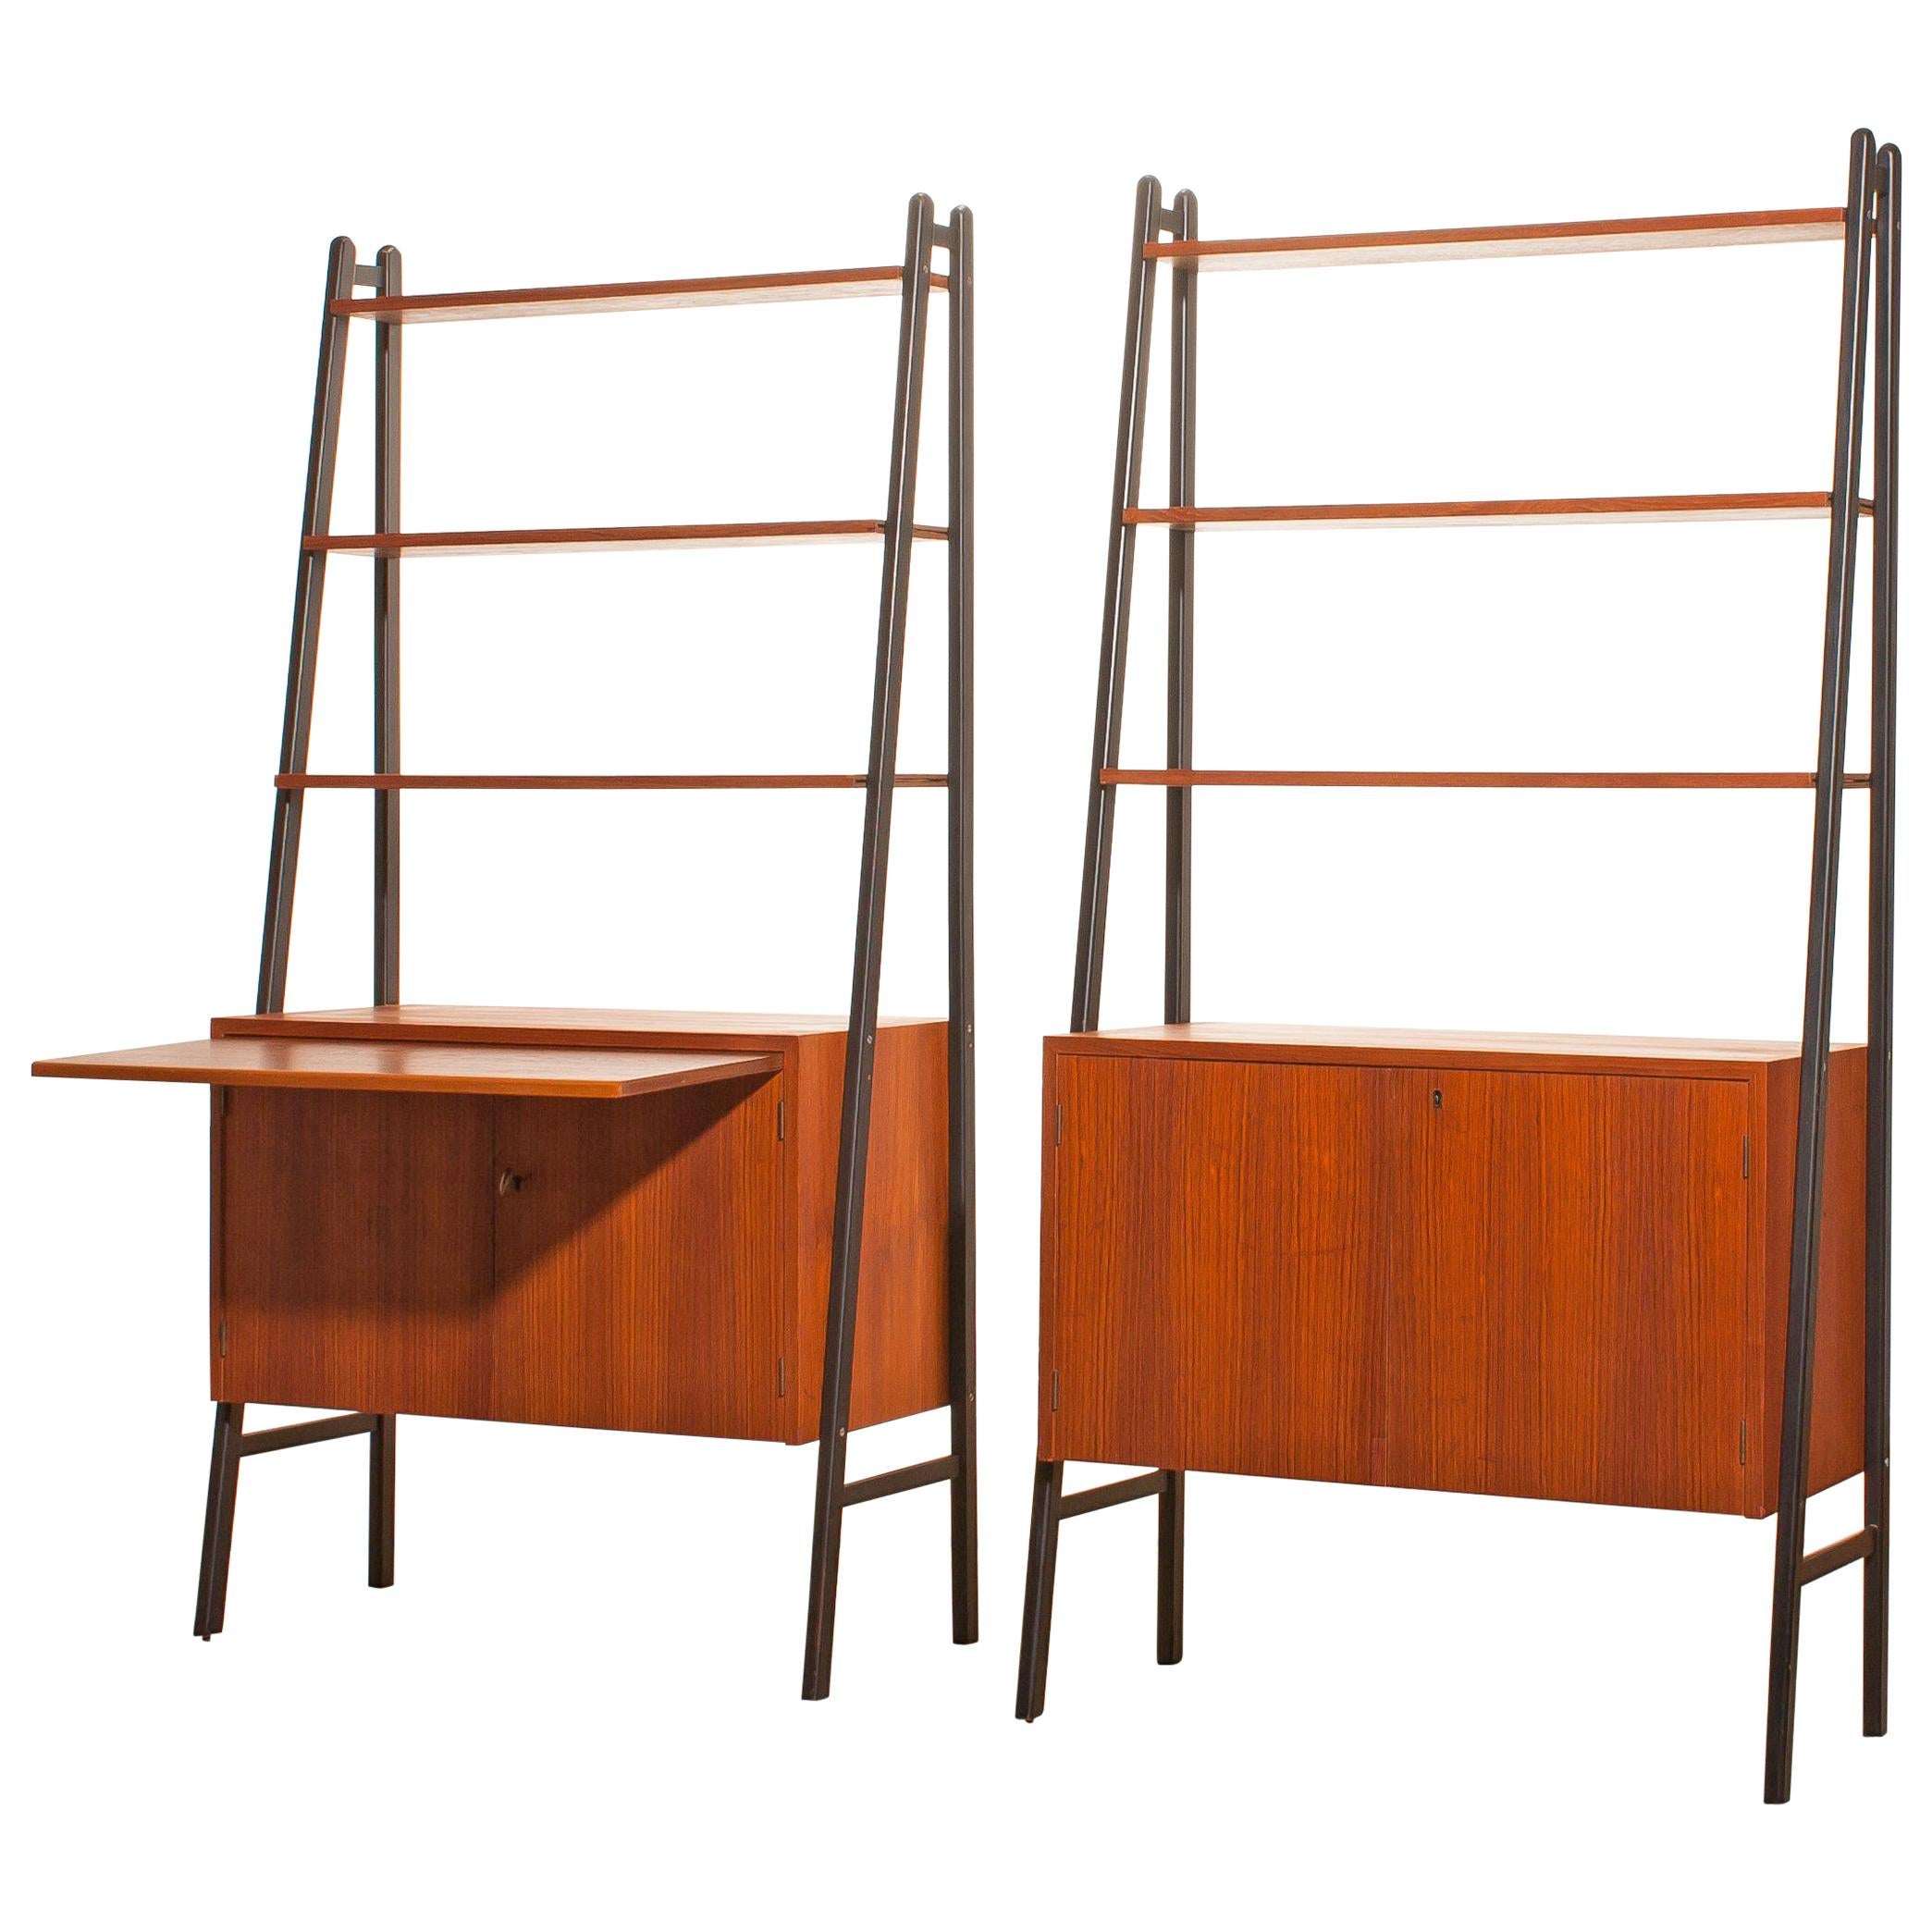 Two beautiful cabinets made of teak with black stands.
Because the cupboard is pretty slim and open to form it is also very suitable to use it as a room divider.
Each cabinet contains three shelves and a two-door cabinet.
One of the cabinets has